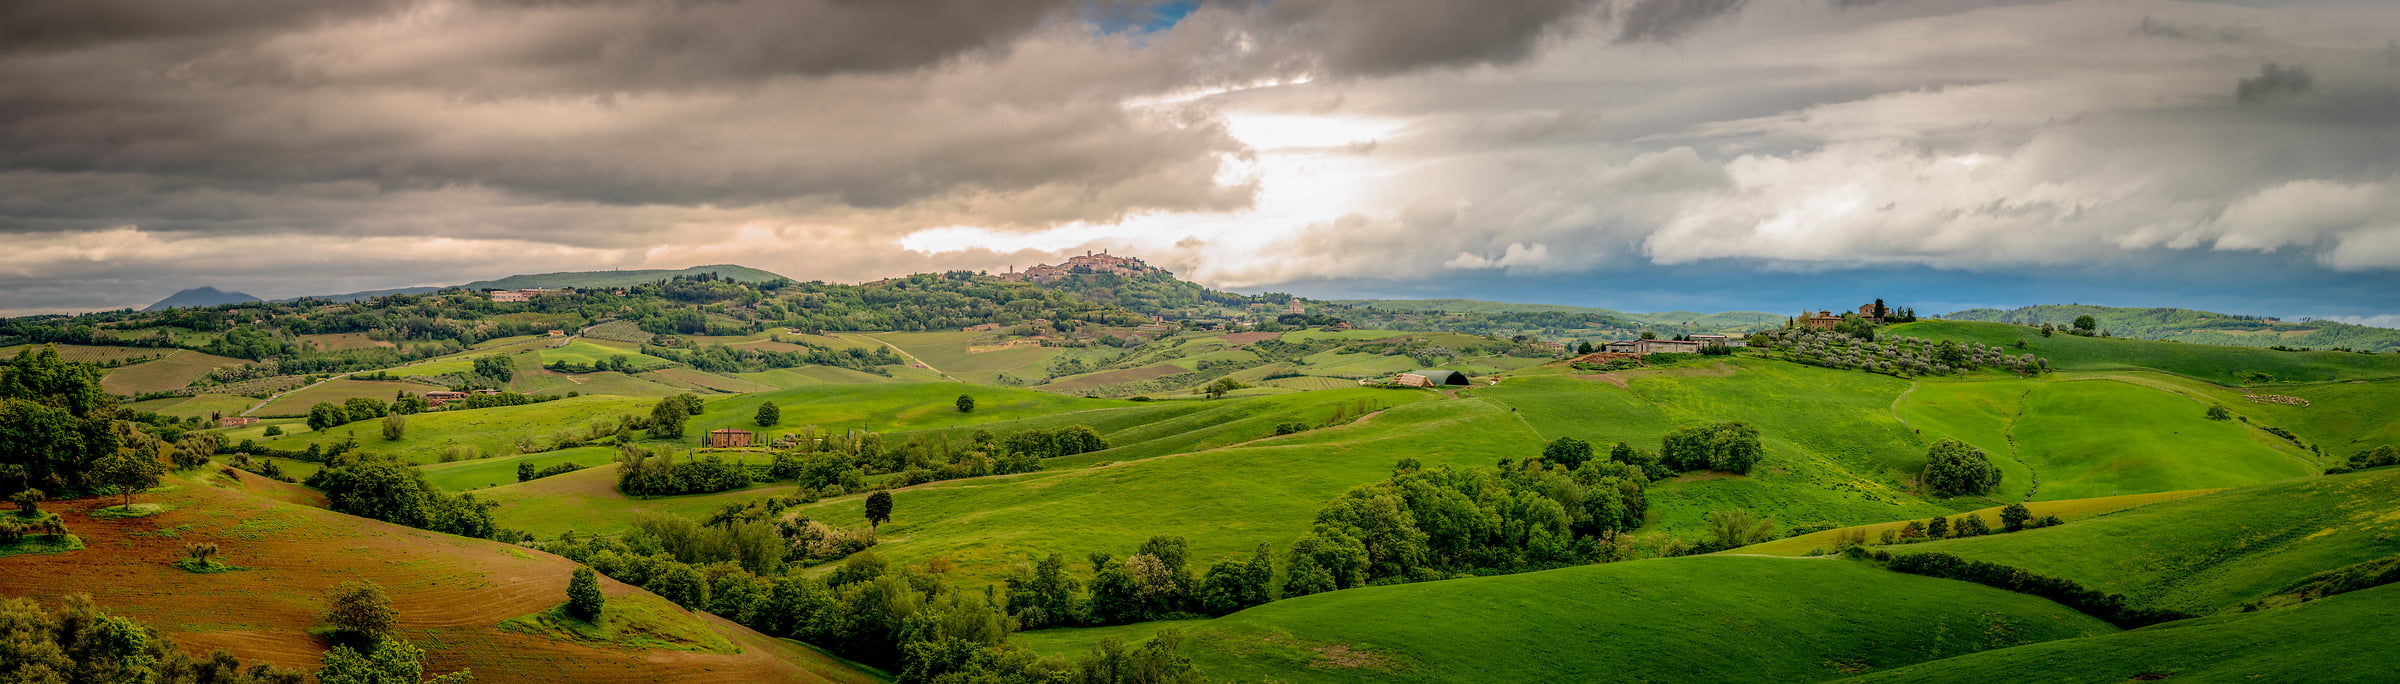 228 megapixels! A very high resolution, large-format VAST photo print of a Tuscan landscape; photograph created by Justin Katz in Chianti, Tuscany, Italy.